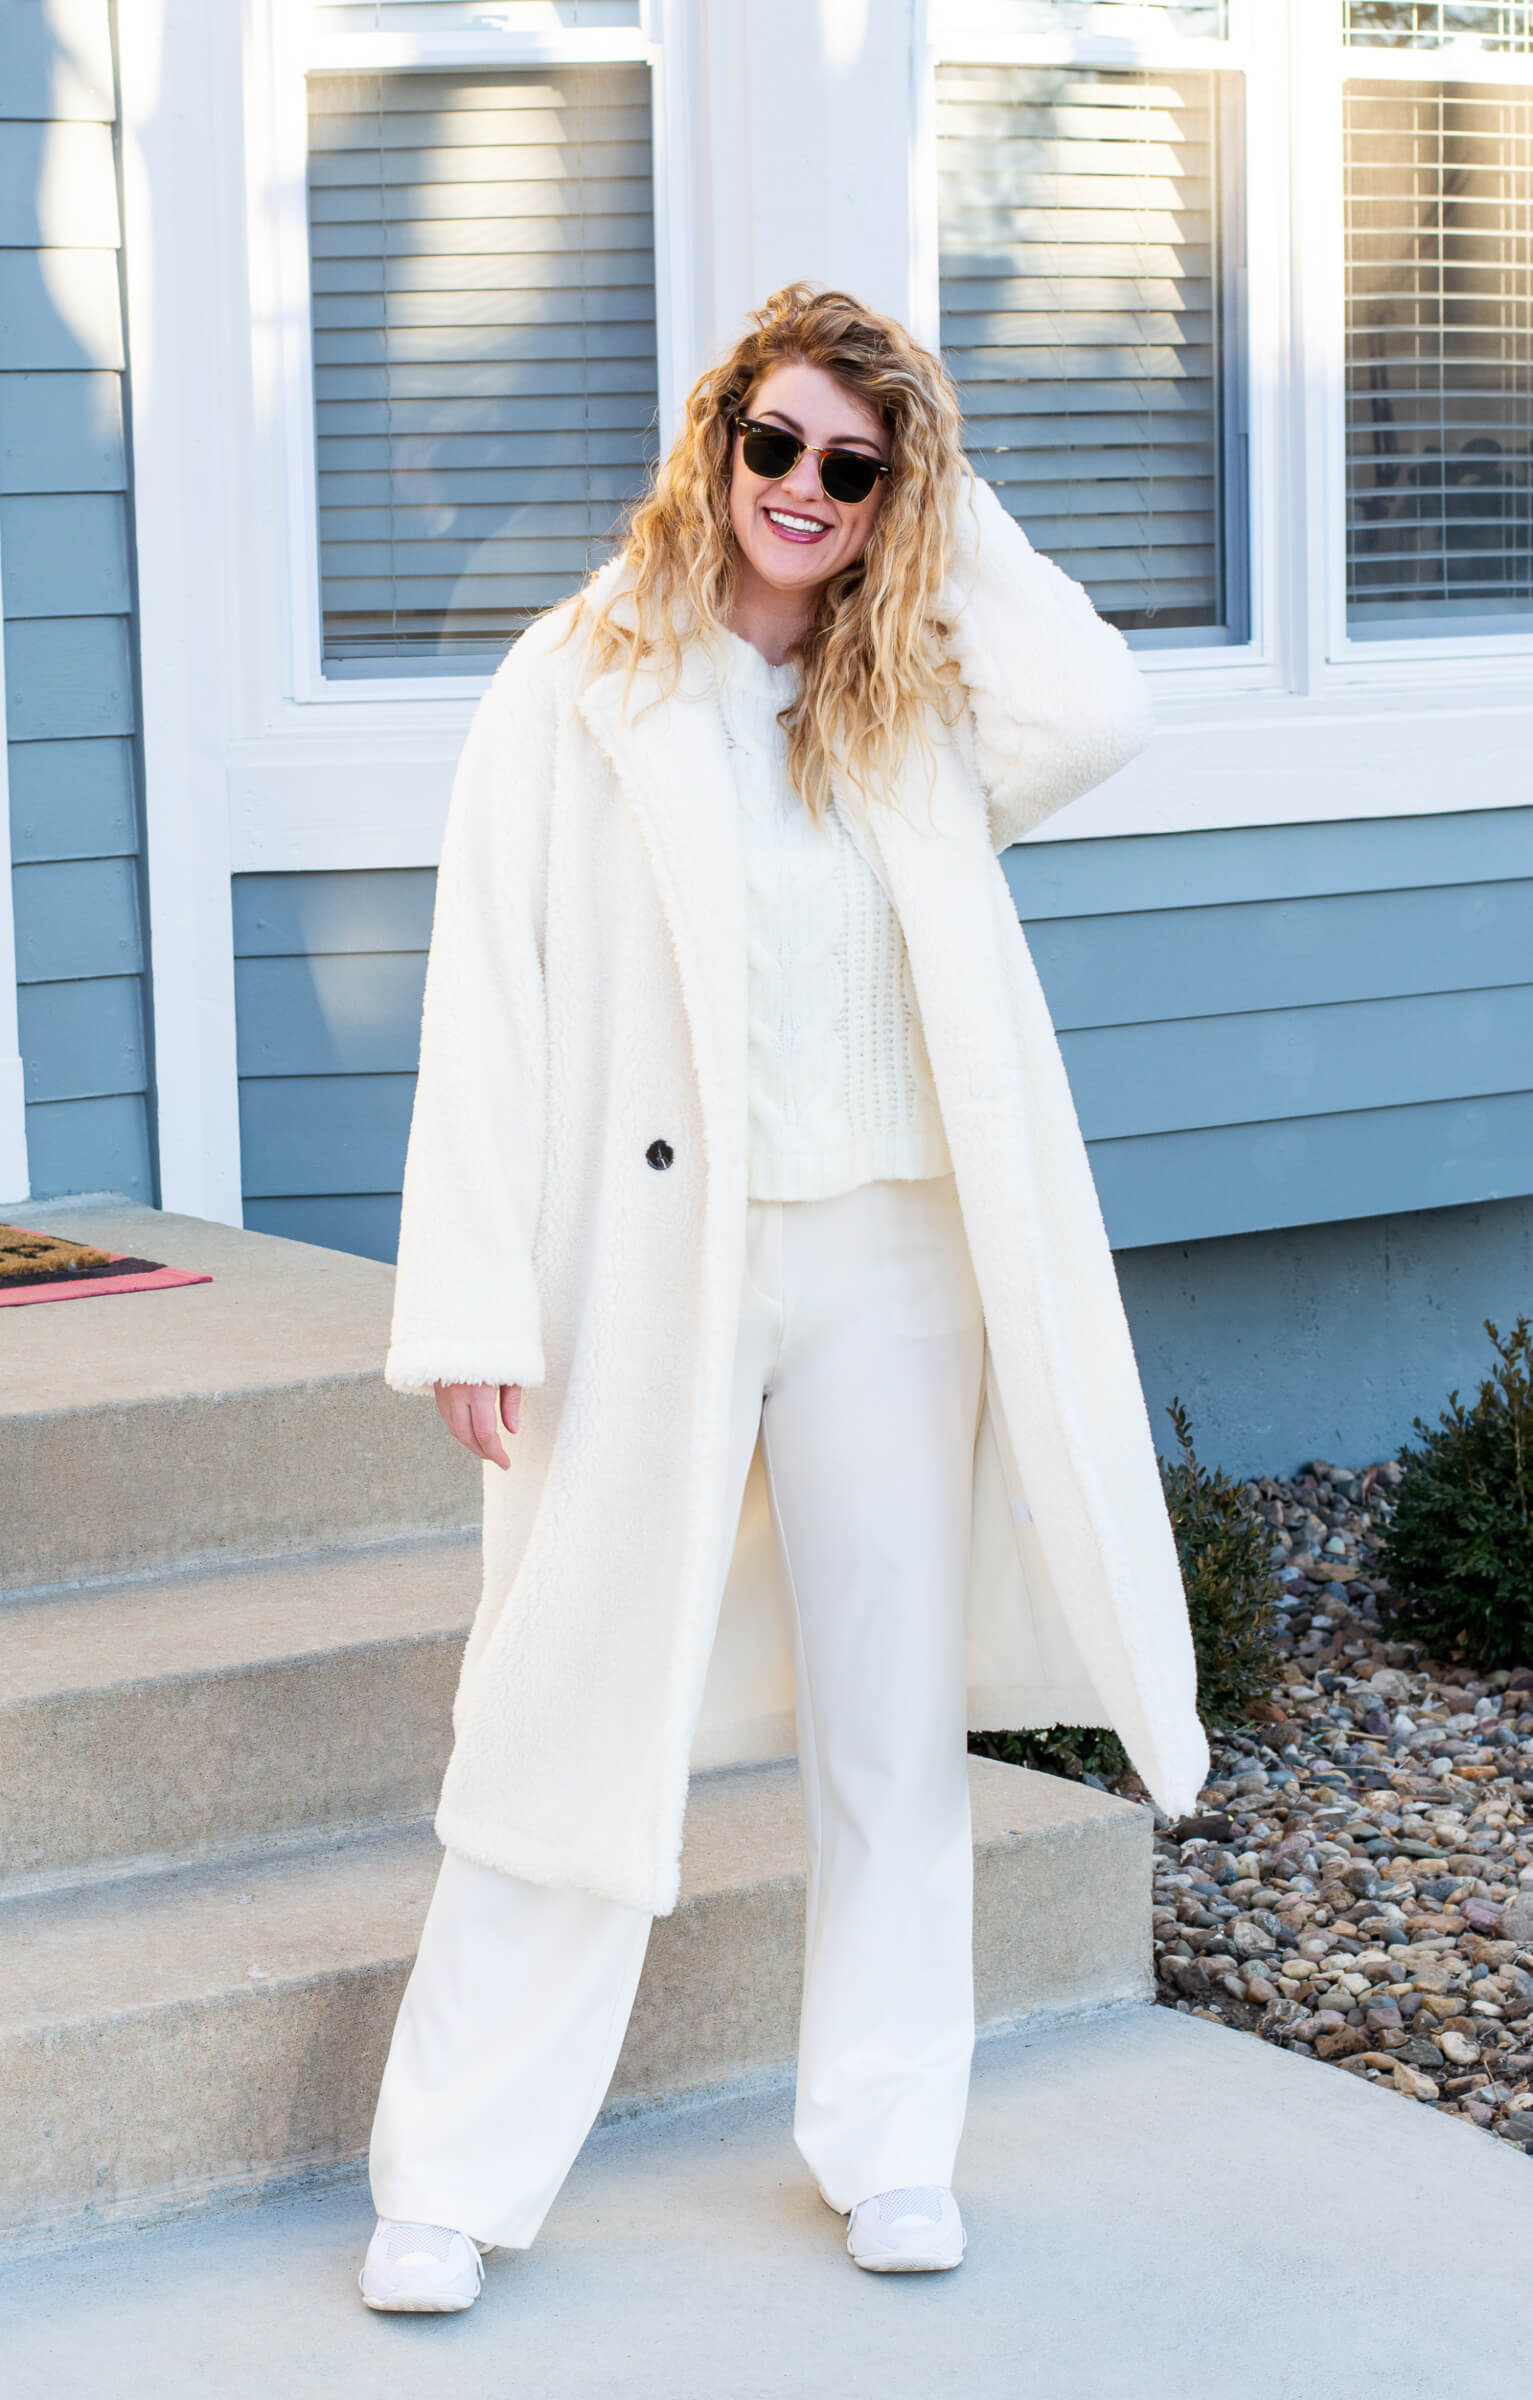 AllWinter White Outfit + Chunky Sneakers. LSR